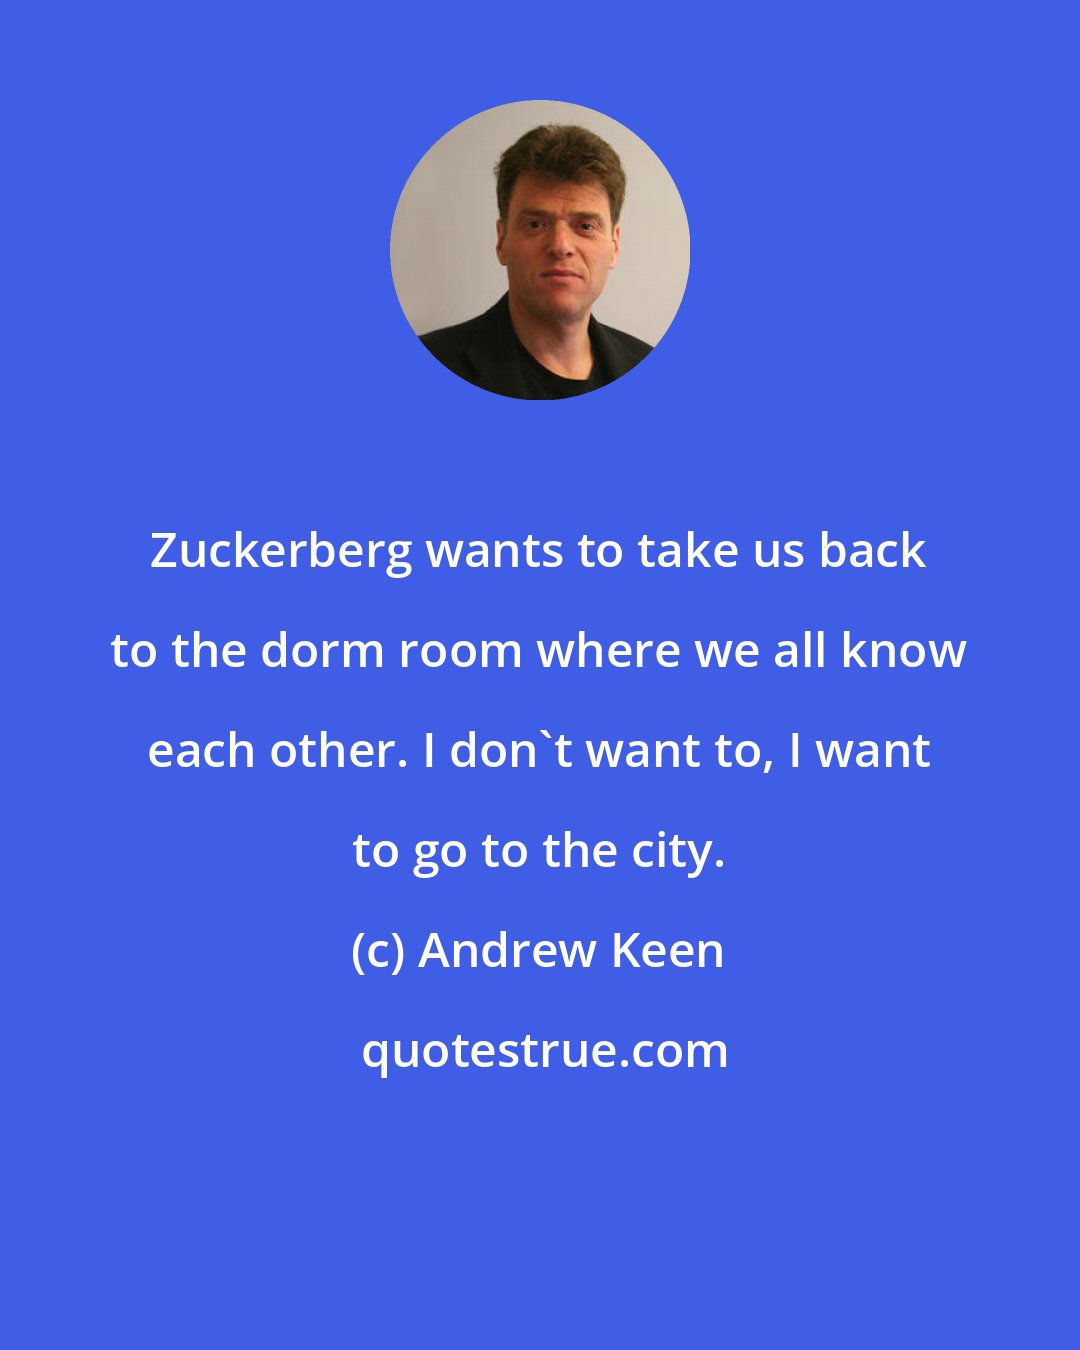 Andrew Keen: Zuckerberg wants to take us back to the dorm room where we all know each other. I don't want to, I want to go to the city.